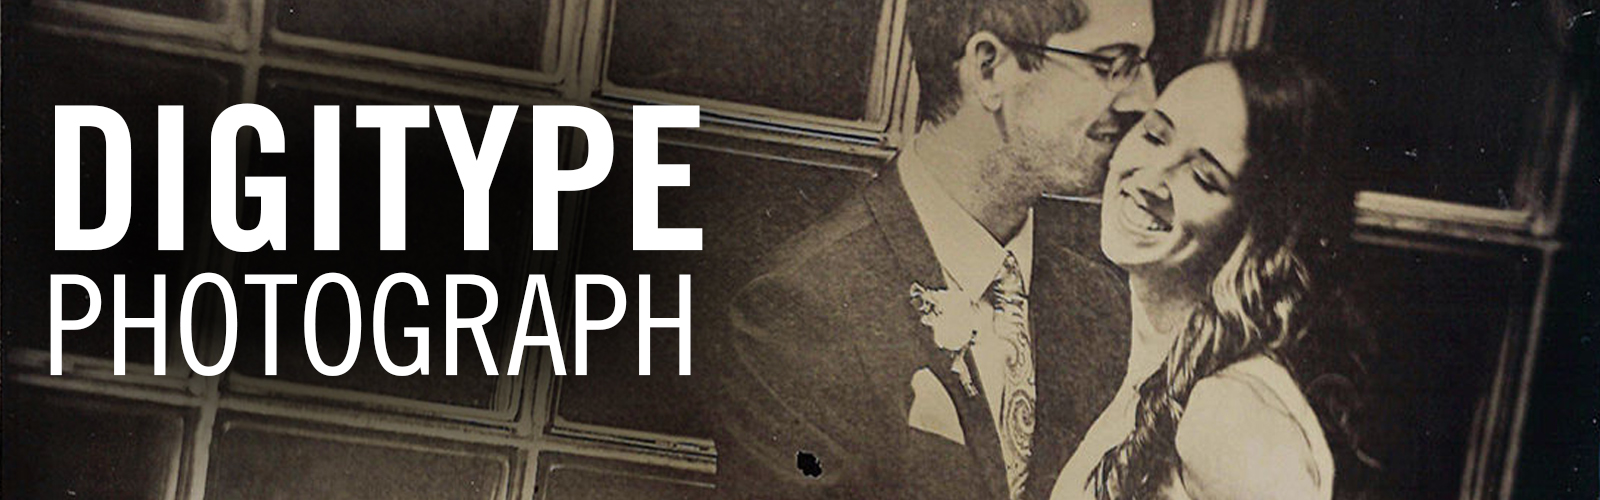 a digital banner that reads "Digitype photograph" on the left and a digitype photo of a couple on the right